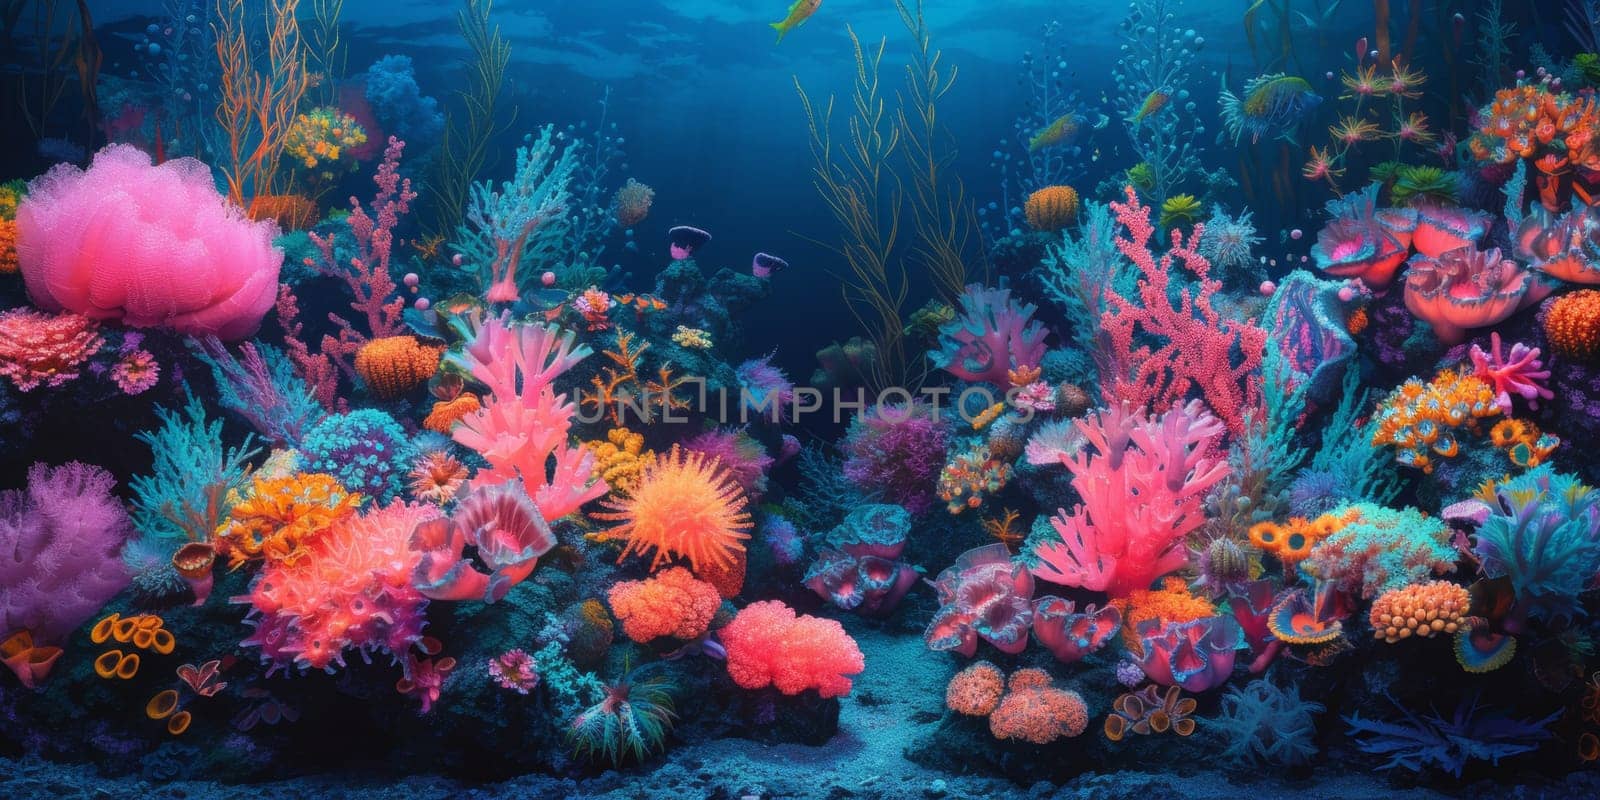 A colorful underwater scene with many different types of coral